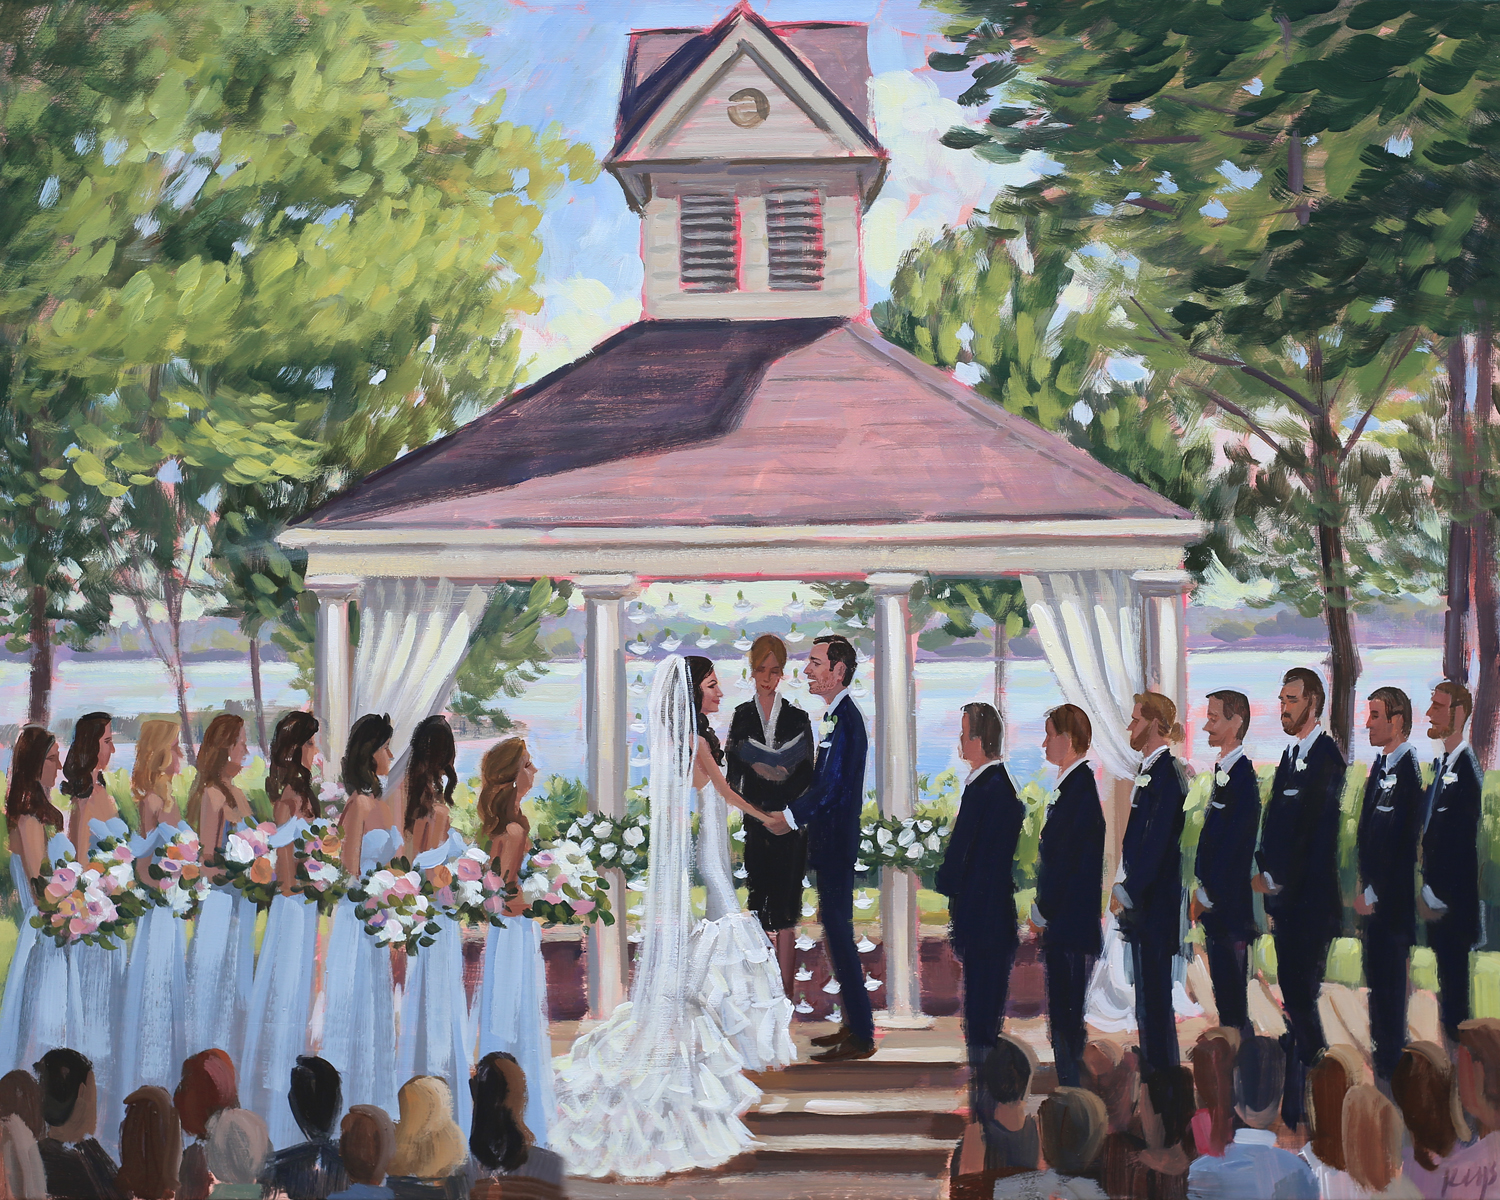 Live Wedding Painter, Ben Keys, captured Courtney + Preston’s wedding day at the picturesque Old North State Club located outside of Charlotte, NC